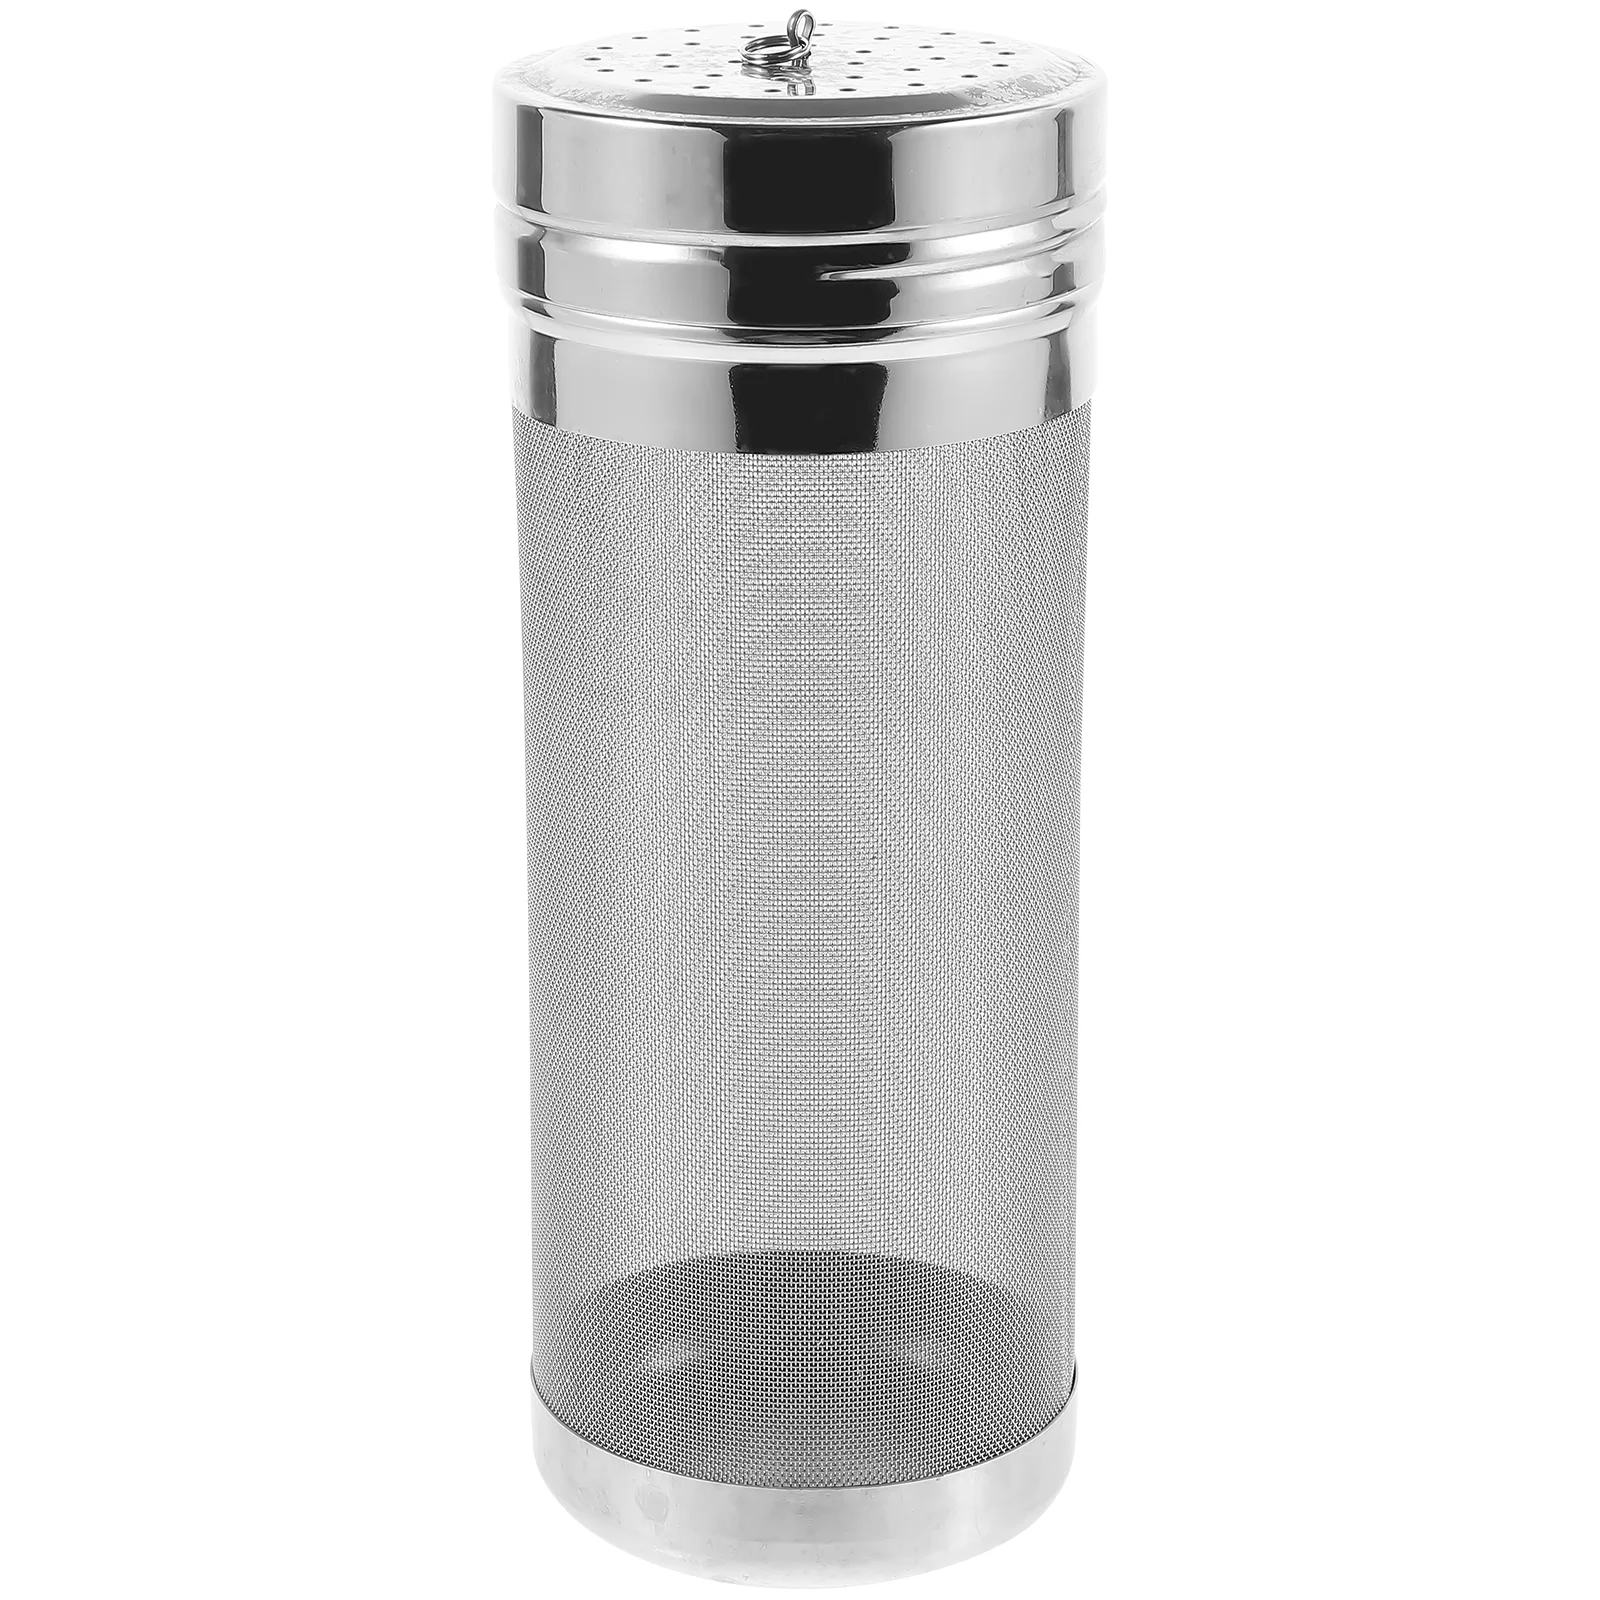 

Beer Filter Portable Tube Strainer Stainless Steel Infuser Filtering Tool Brewing Supply Metal